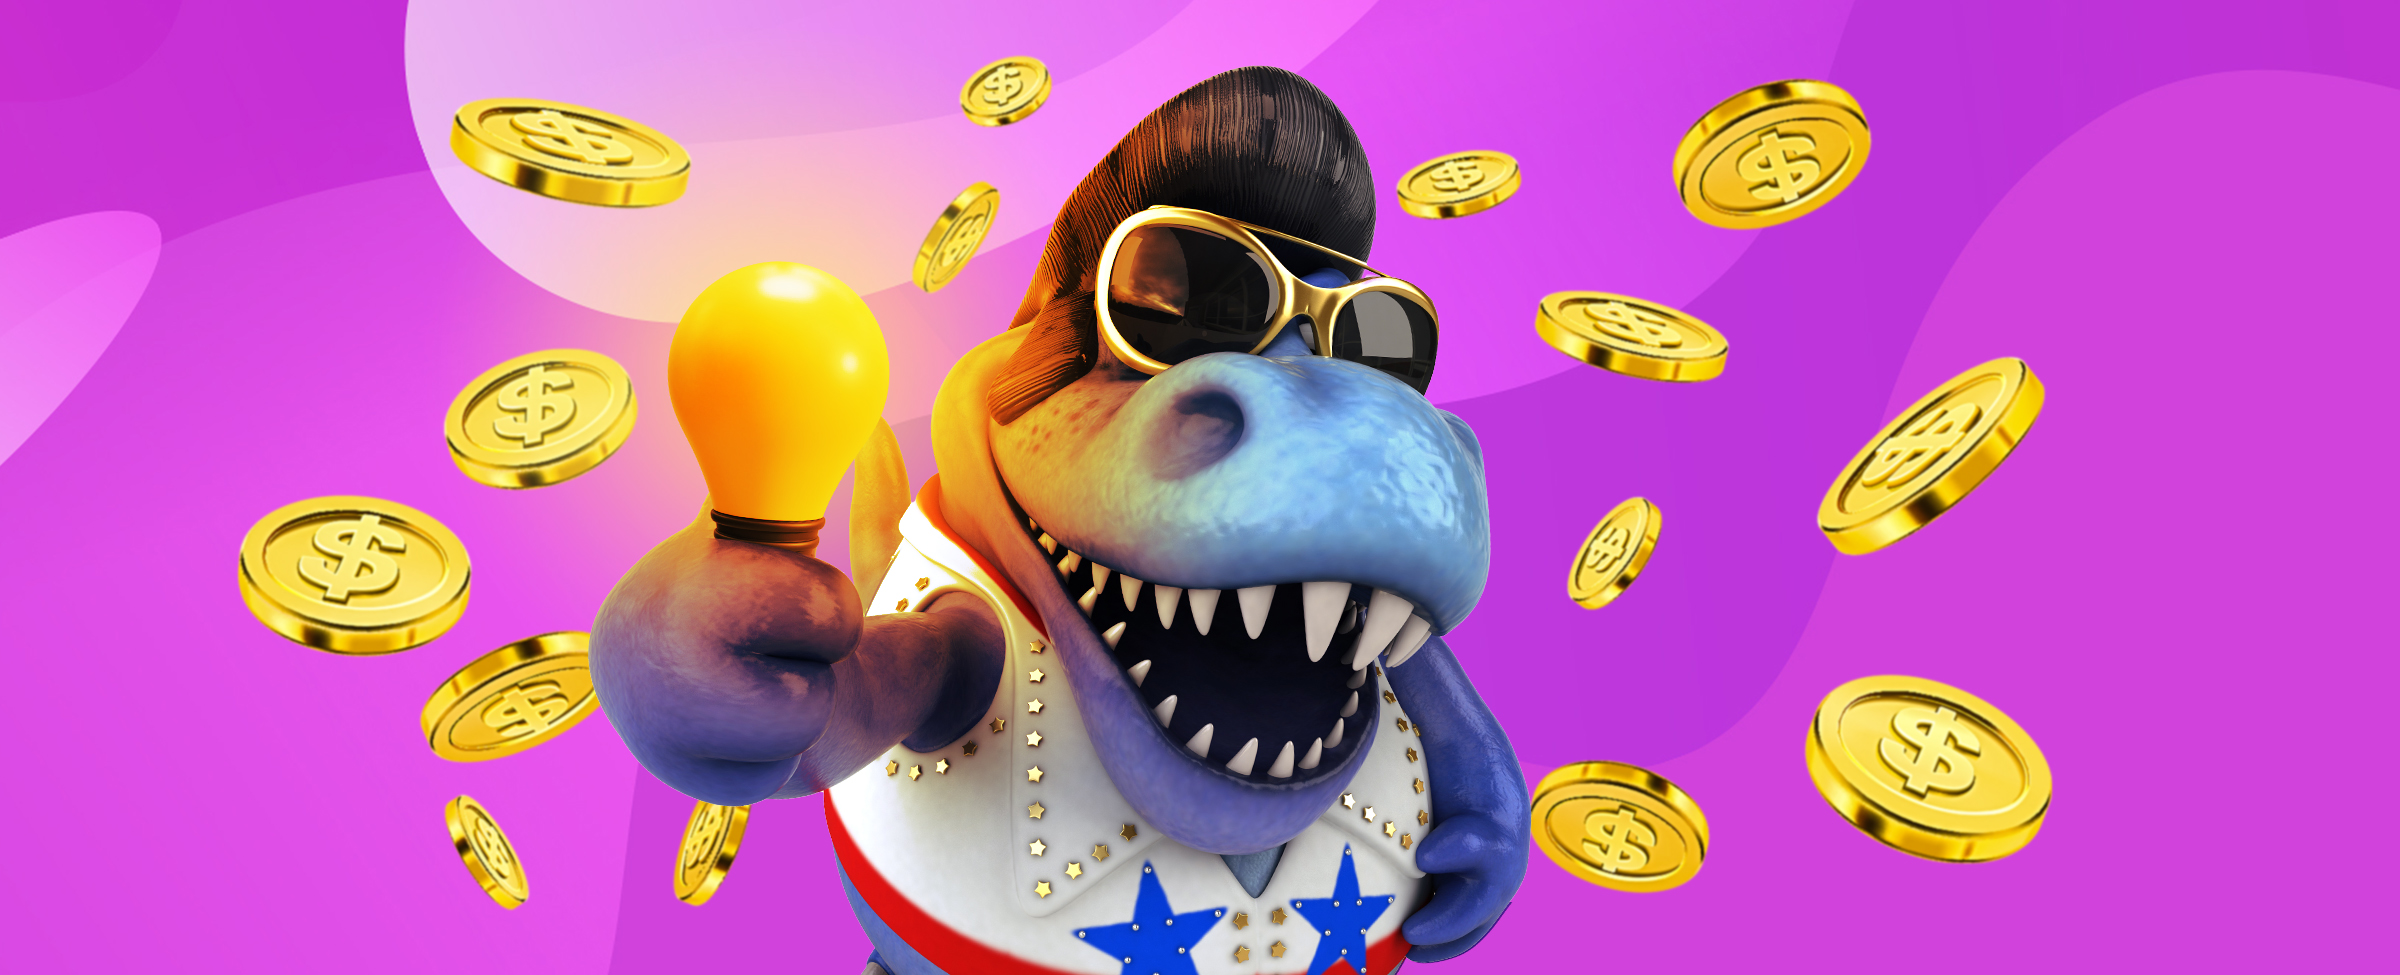 A cartoon character of a hippopotamus dressed as Elvis holding up a yellow light bulb surrounded by levitating gold coins